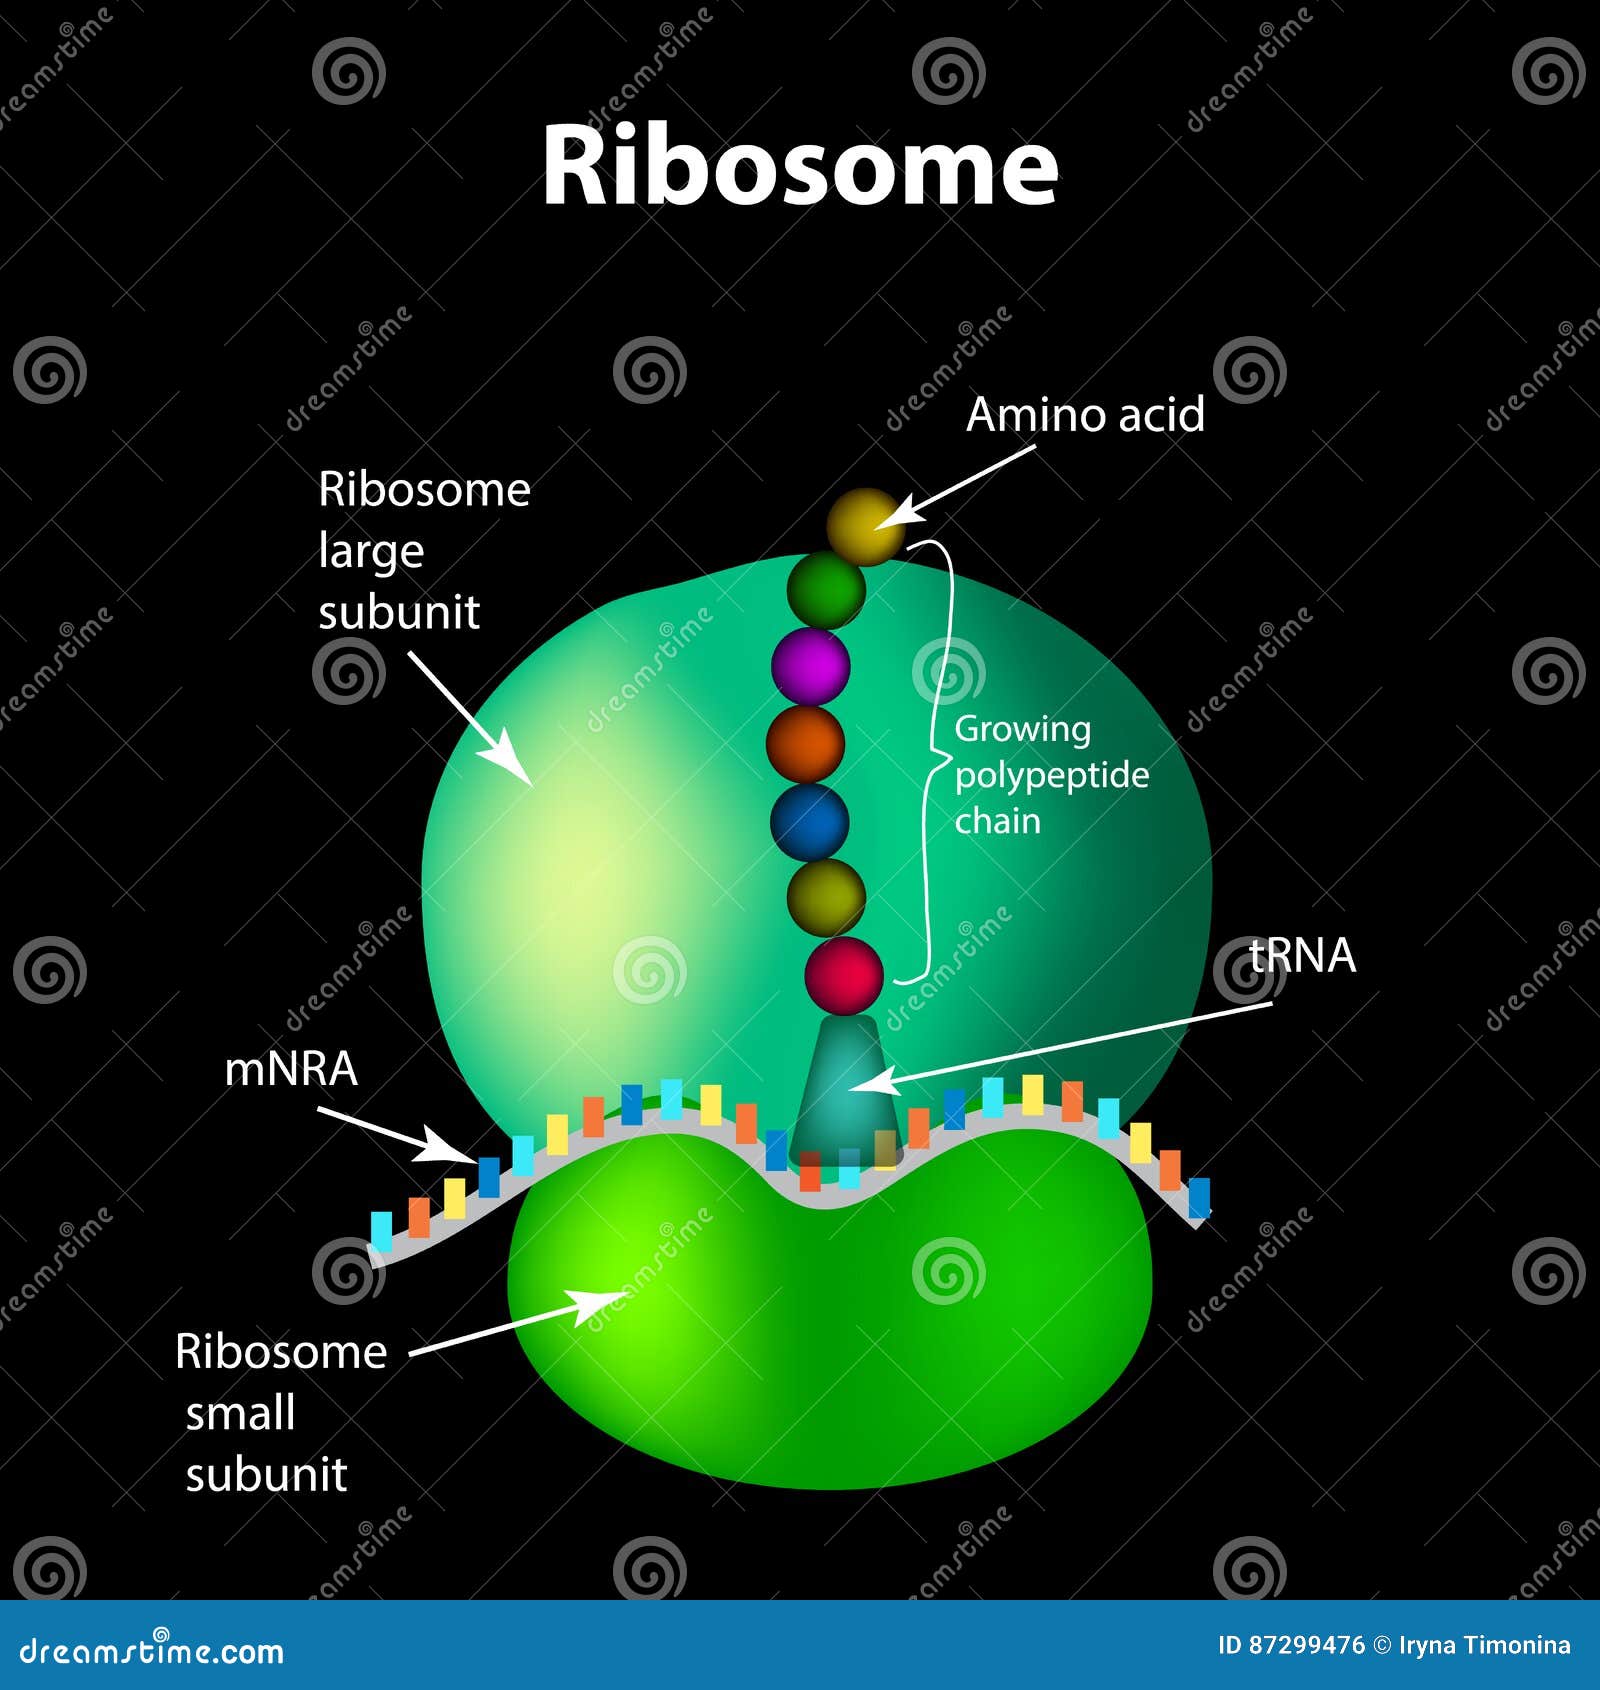 Ribosome Meaning Types and Structure